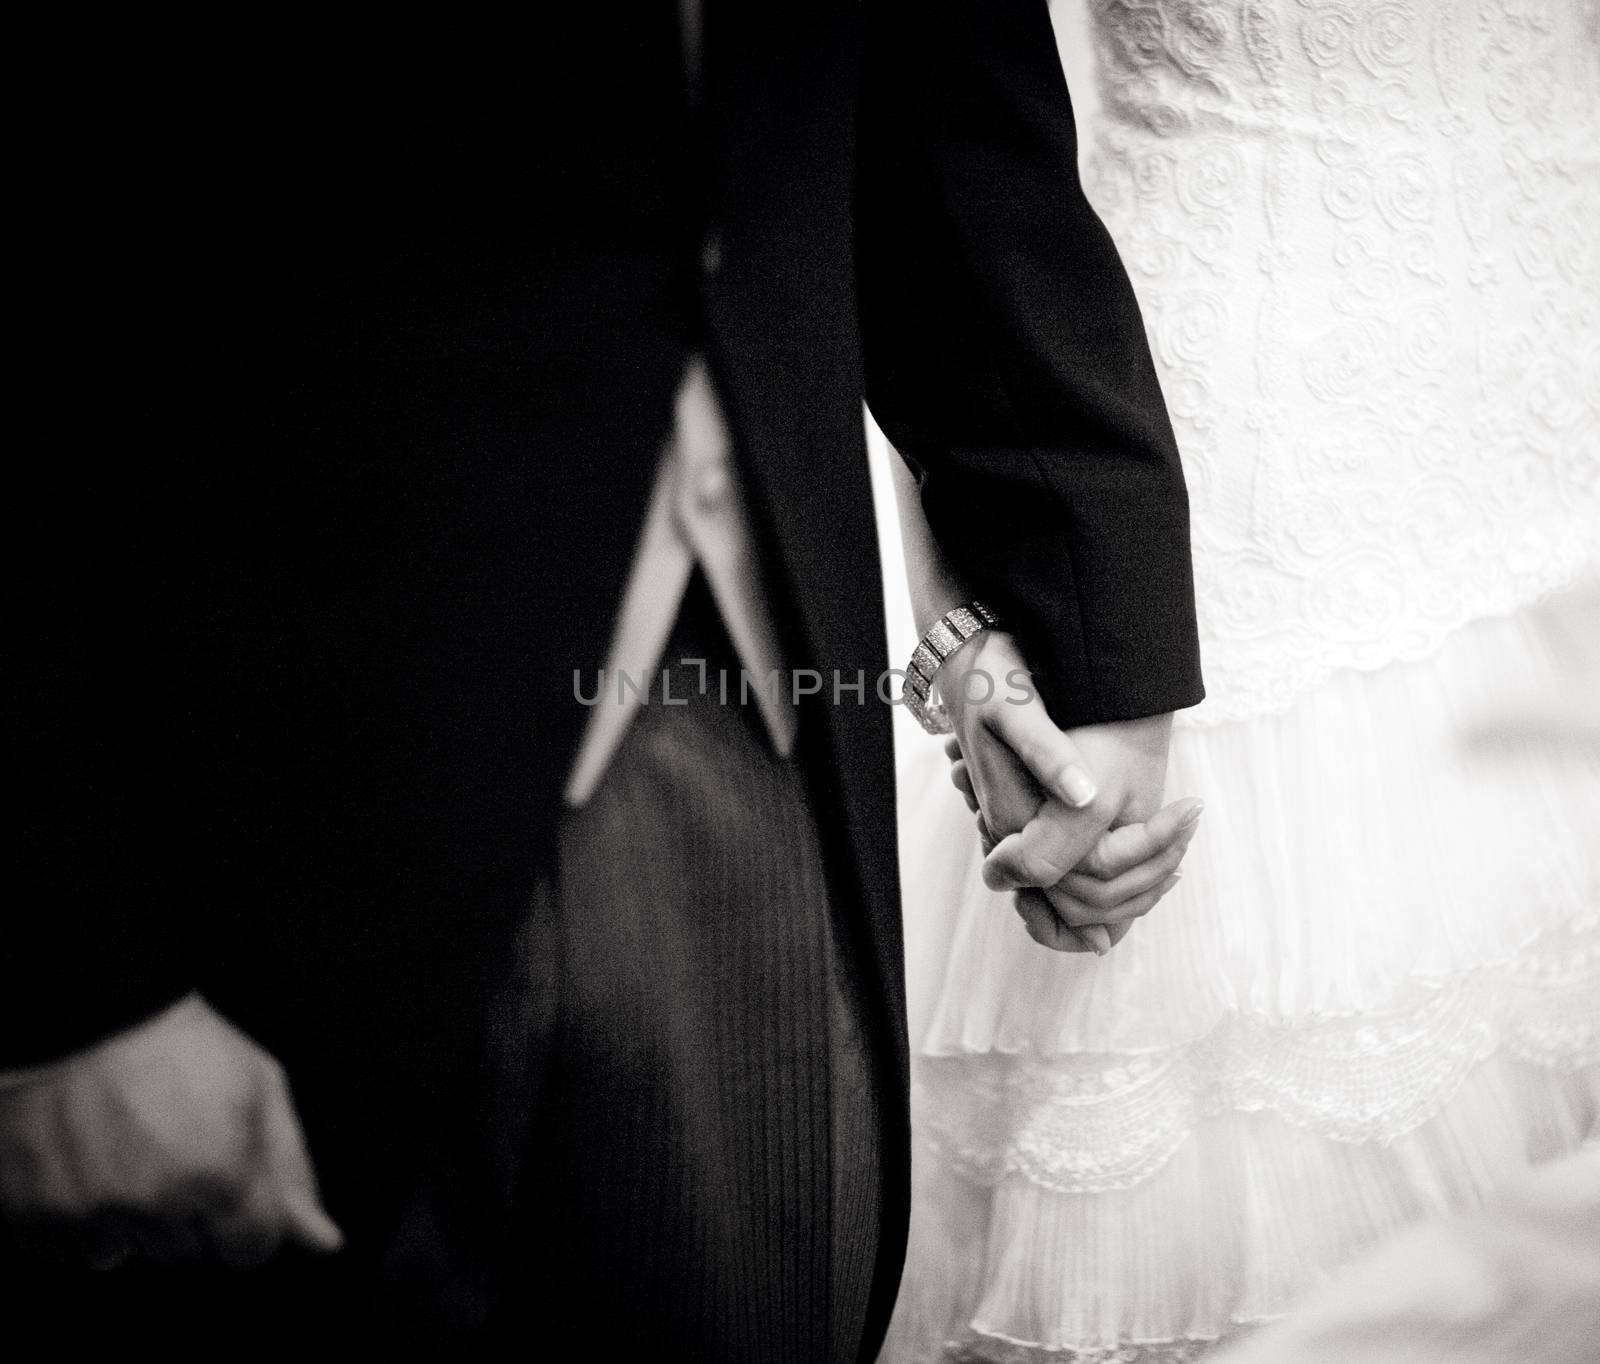 Black and white artistic digital rectangular horizontal photo of the bride wearing white wedding dress holding hands with the bridegroom wearing long jacket dark morning suit during church wedding marriage ceremony in Madrid Spain. Shallow depth of on foreground with background out of focus. 